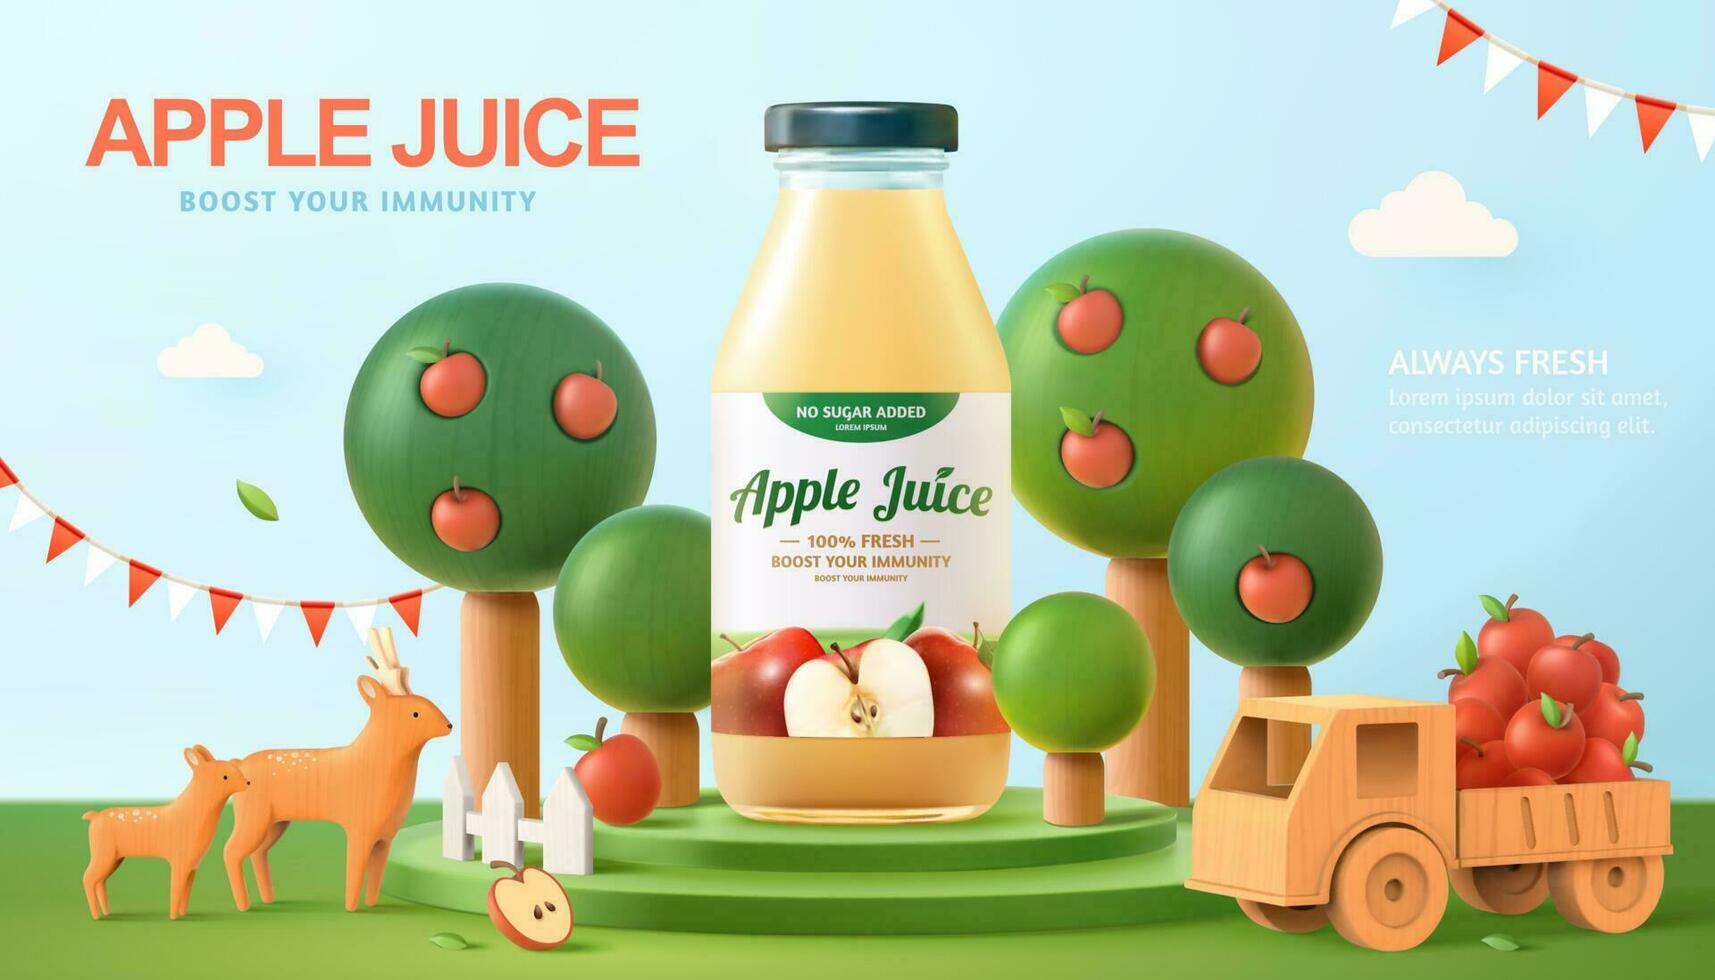 Fresh apple juice ad in 3d illustration, realistic bottle on a stage with apple trees around with wooden deers and a small truck filled with ripe apples vector